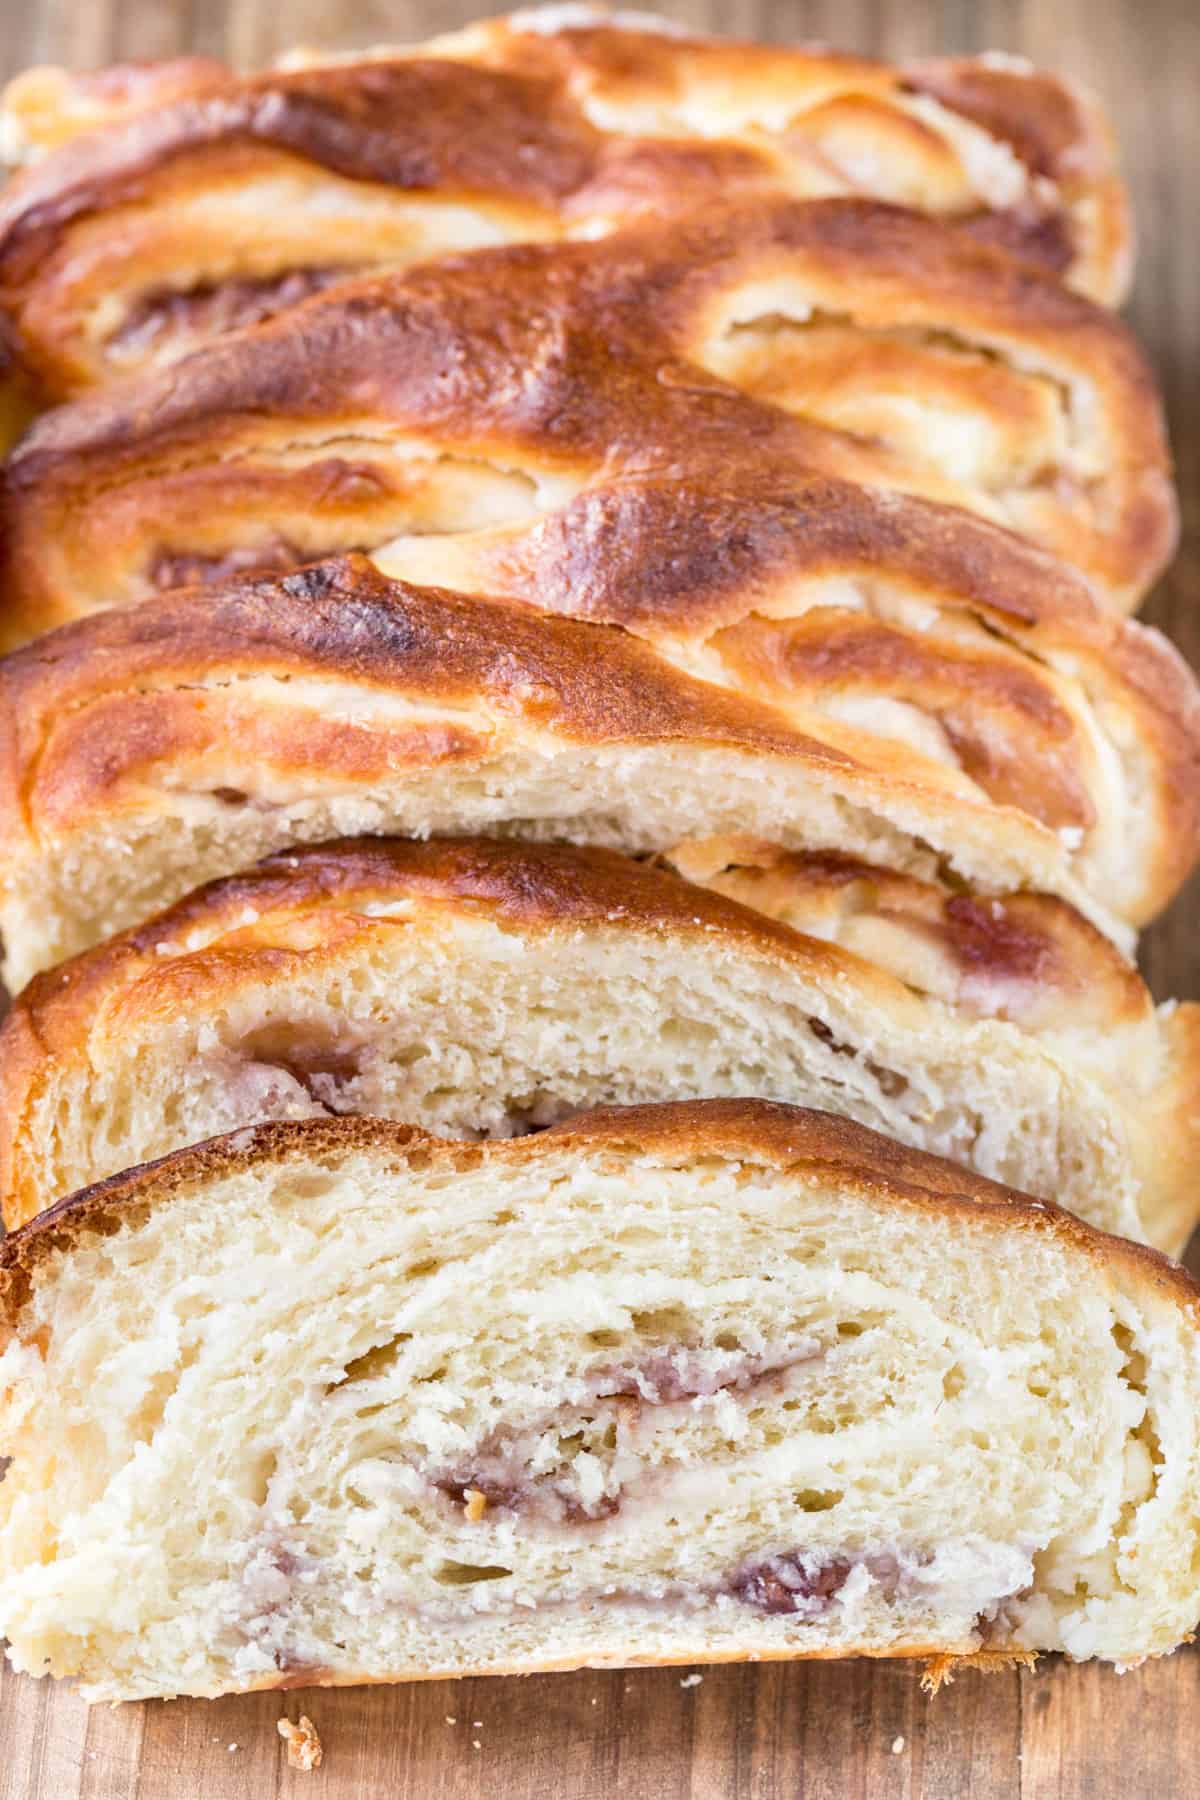 Sliced of Sweet bread recipe with jam and cream cheese inside the bread.